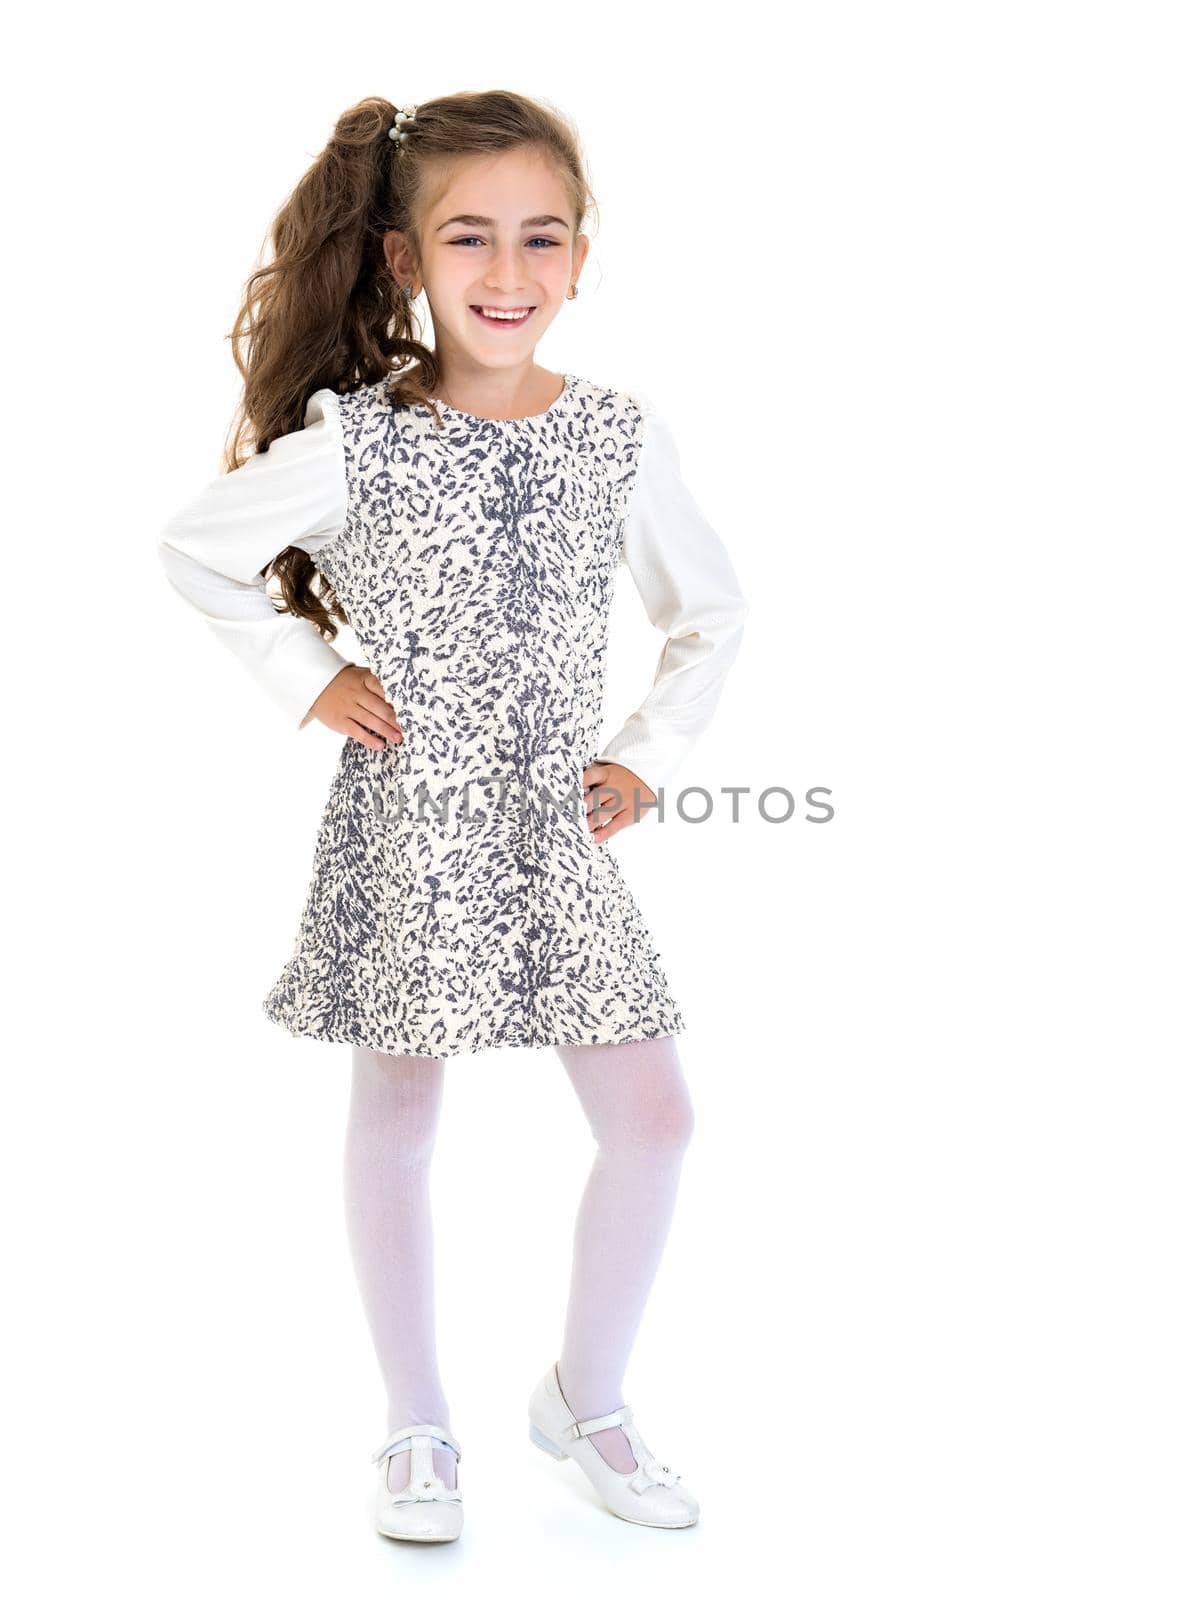 Beautiful little school girl with long silky hair. Studio portrait in full growth. Concept of style and fashion, happy people. Isolated on white background.